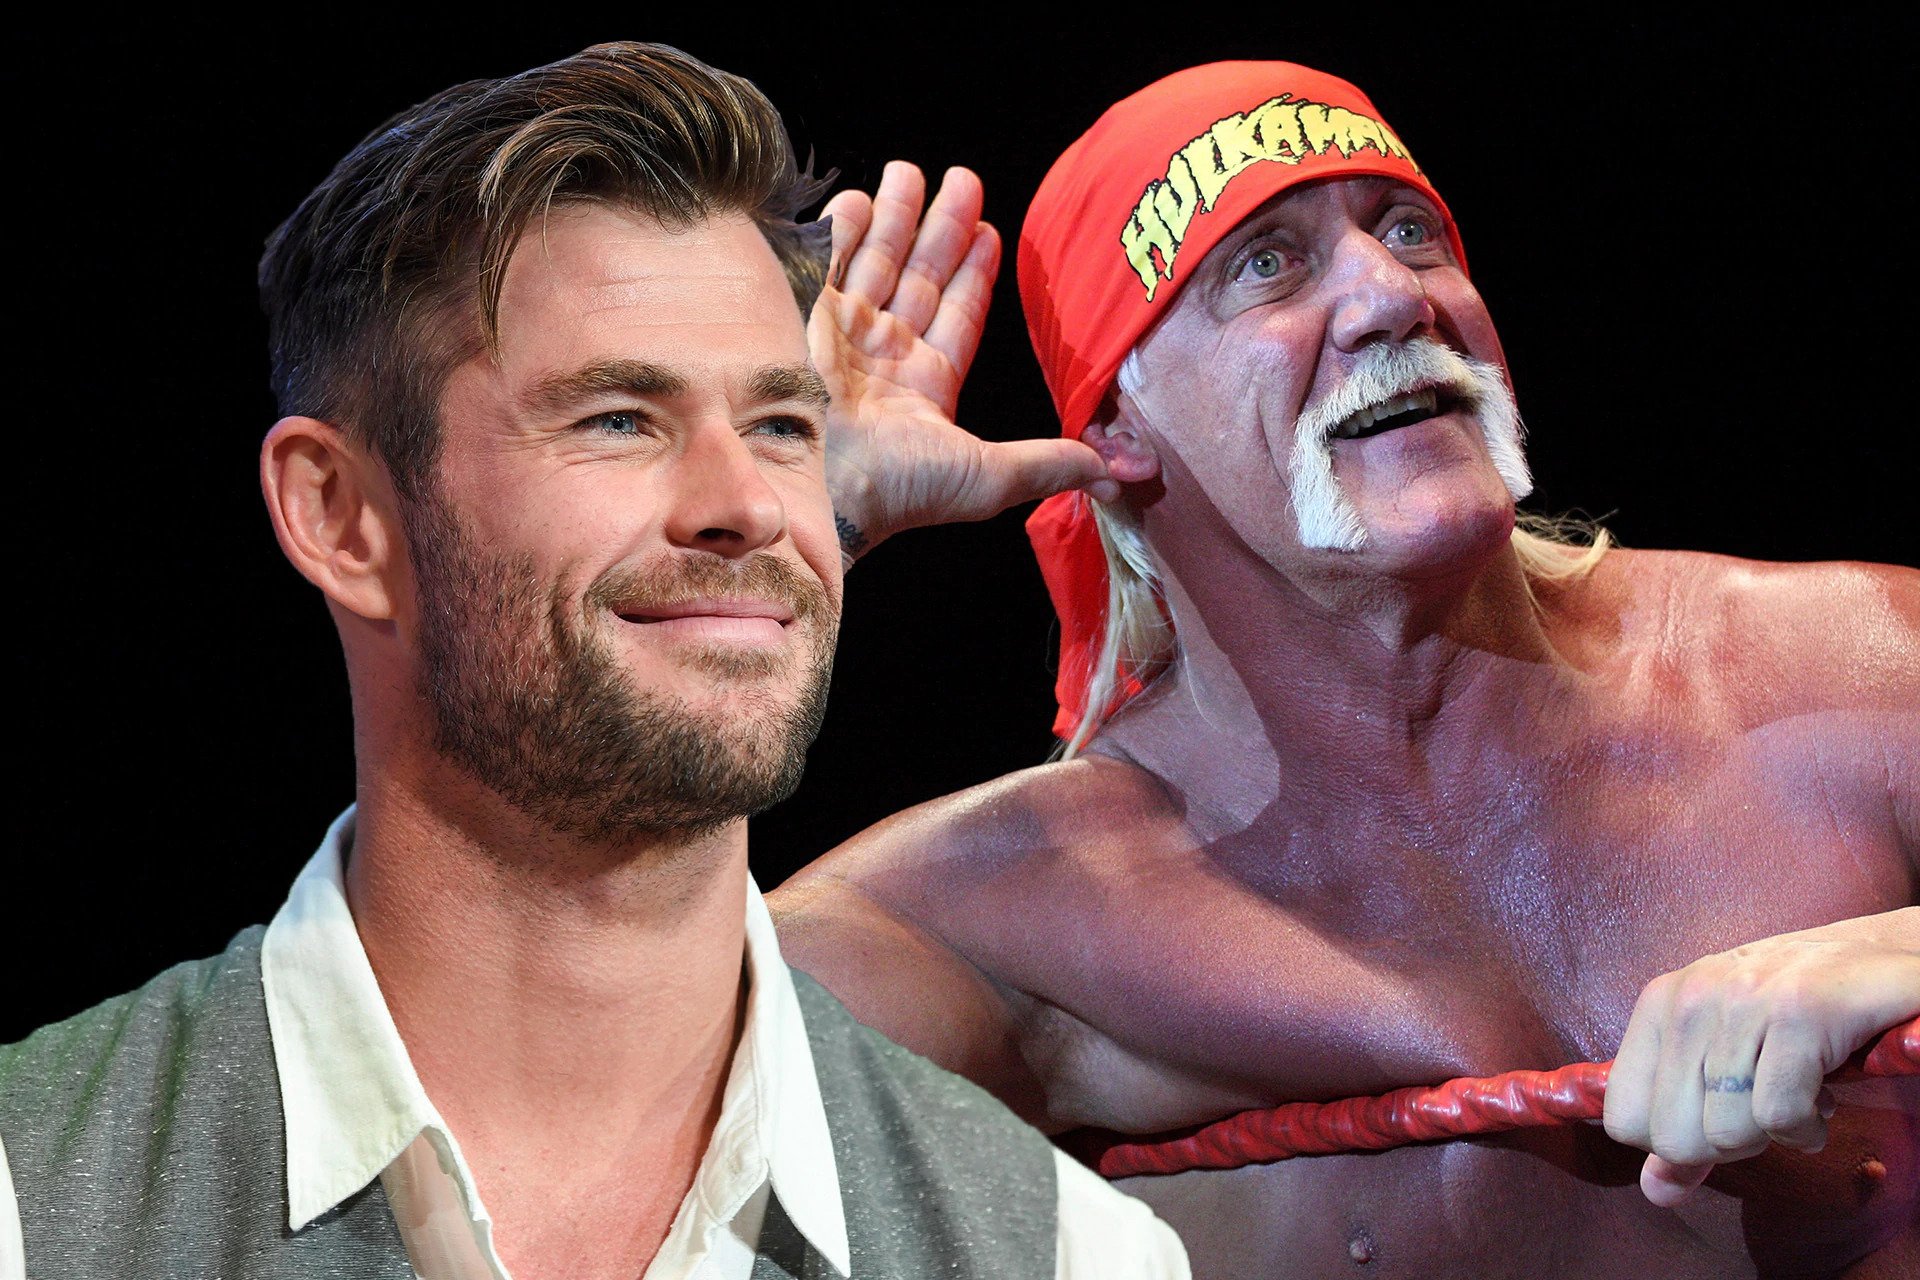 Chris Hemsworth Is Getting More Jacked Than Ever To Play Hulk Hogan In A Netflix Biopic